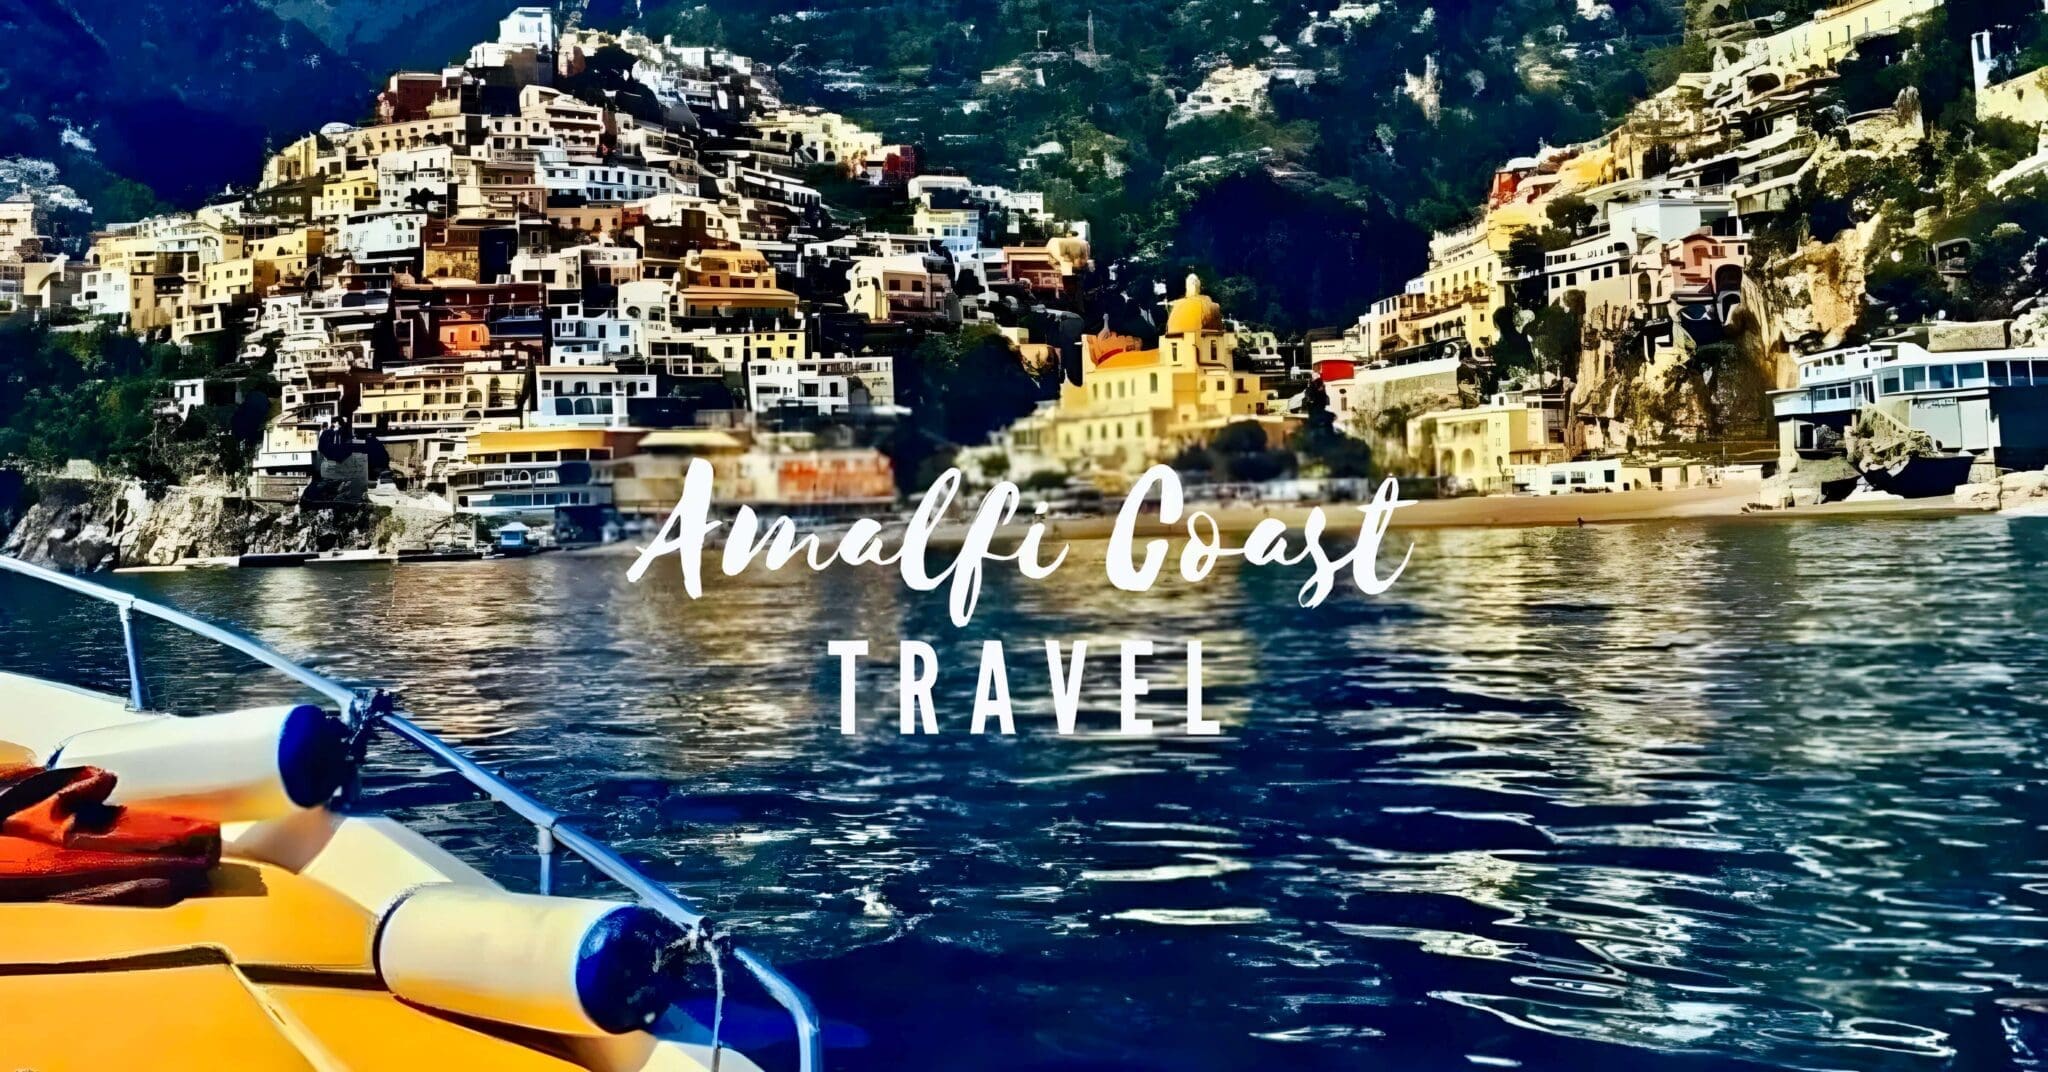 From rome to amalfi in 1 week